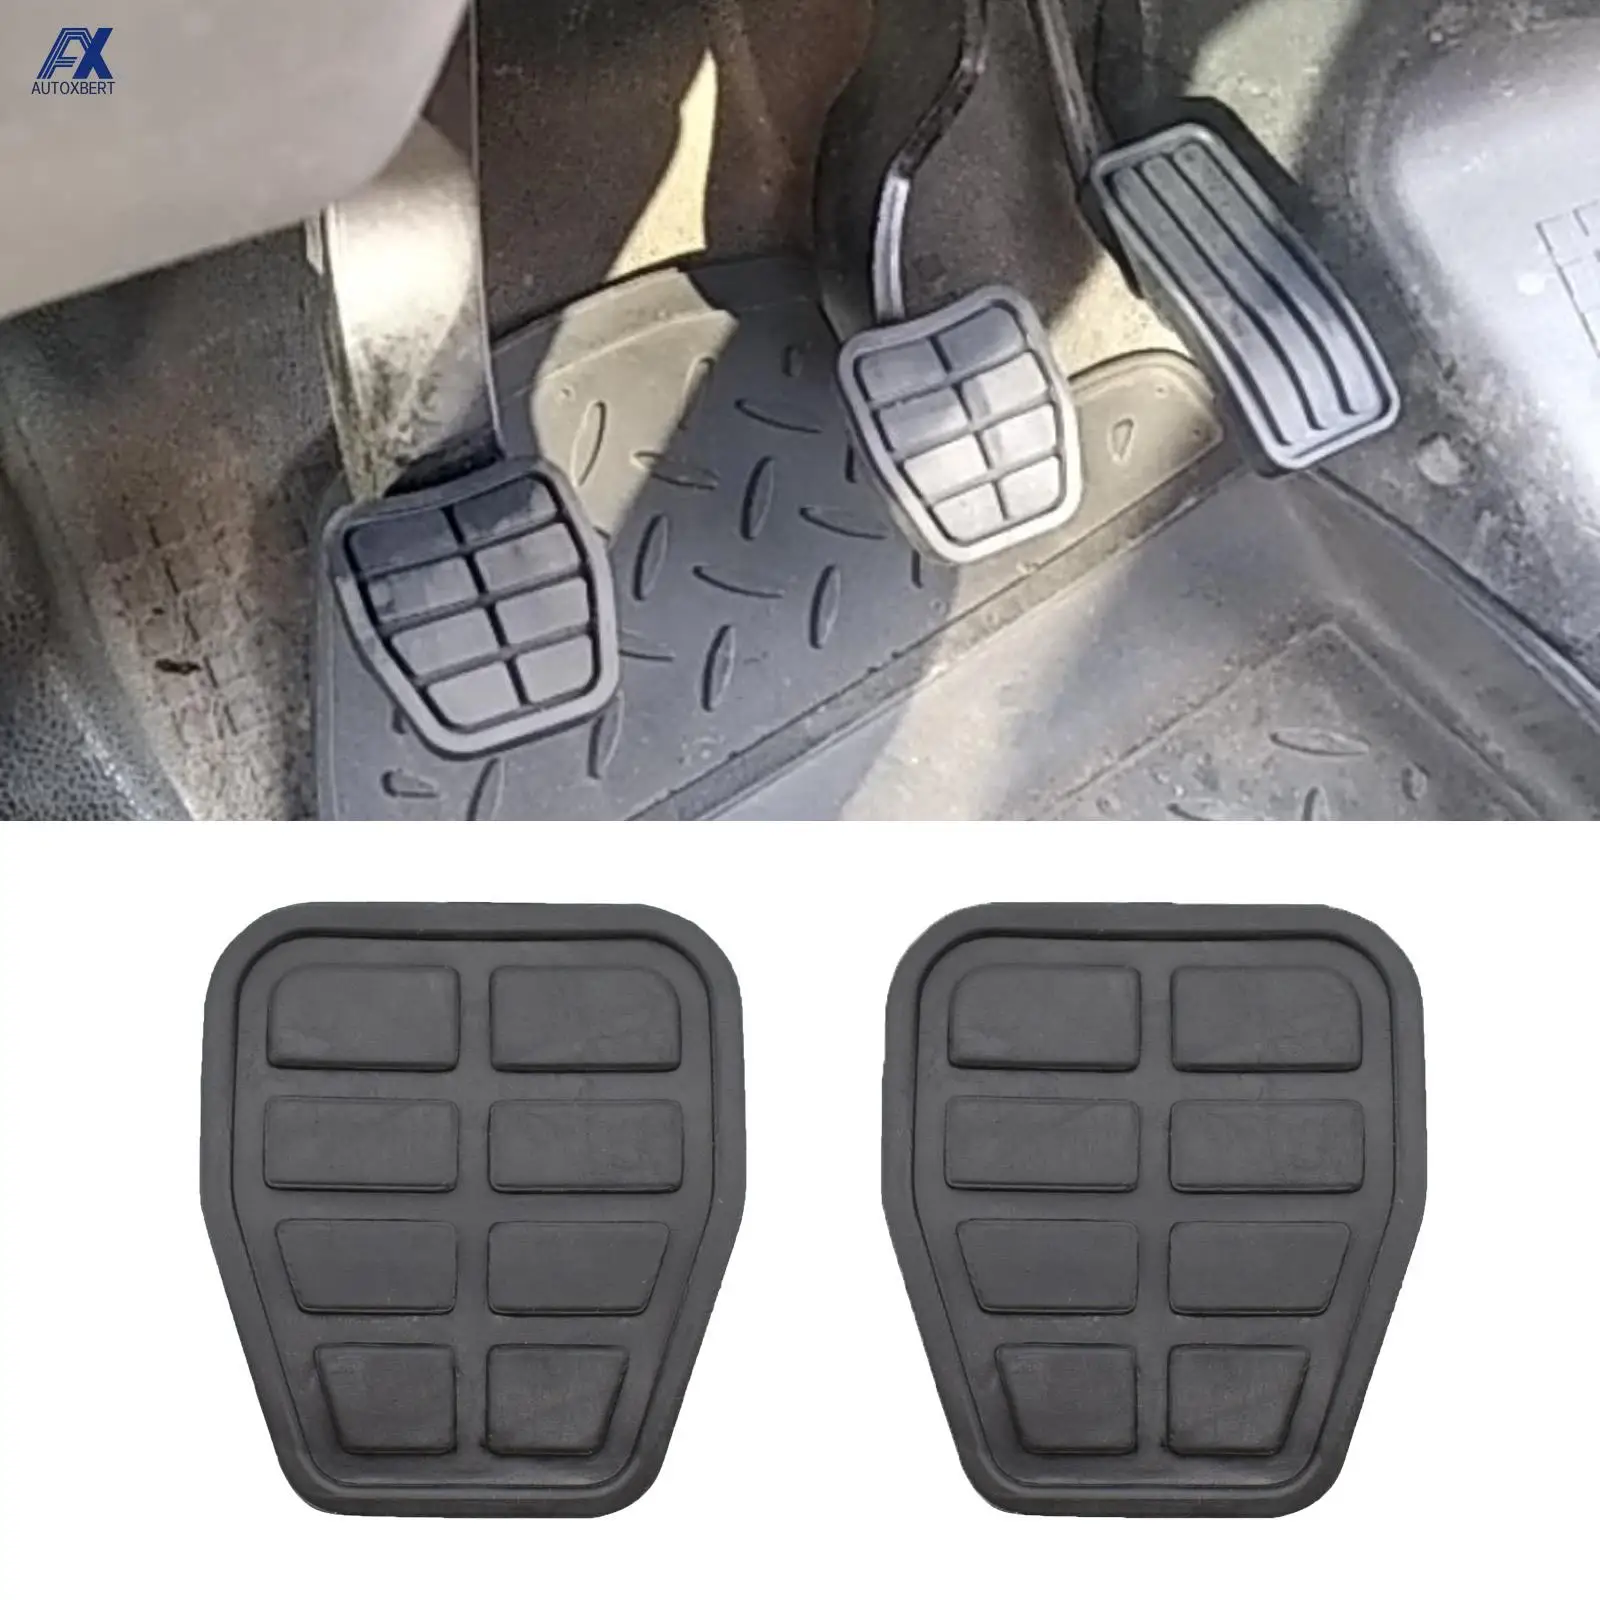 2Pcs Auto Brake Clutch Foot Pedal Pads Cover Skid-proof For VW Golf Jett... - $7.93